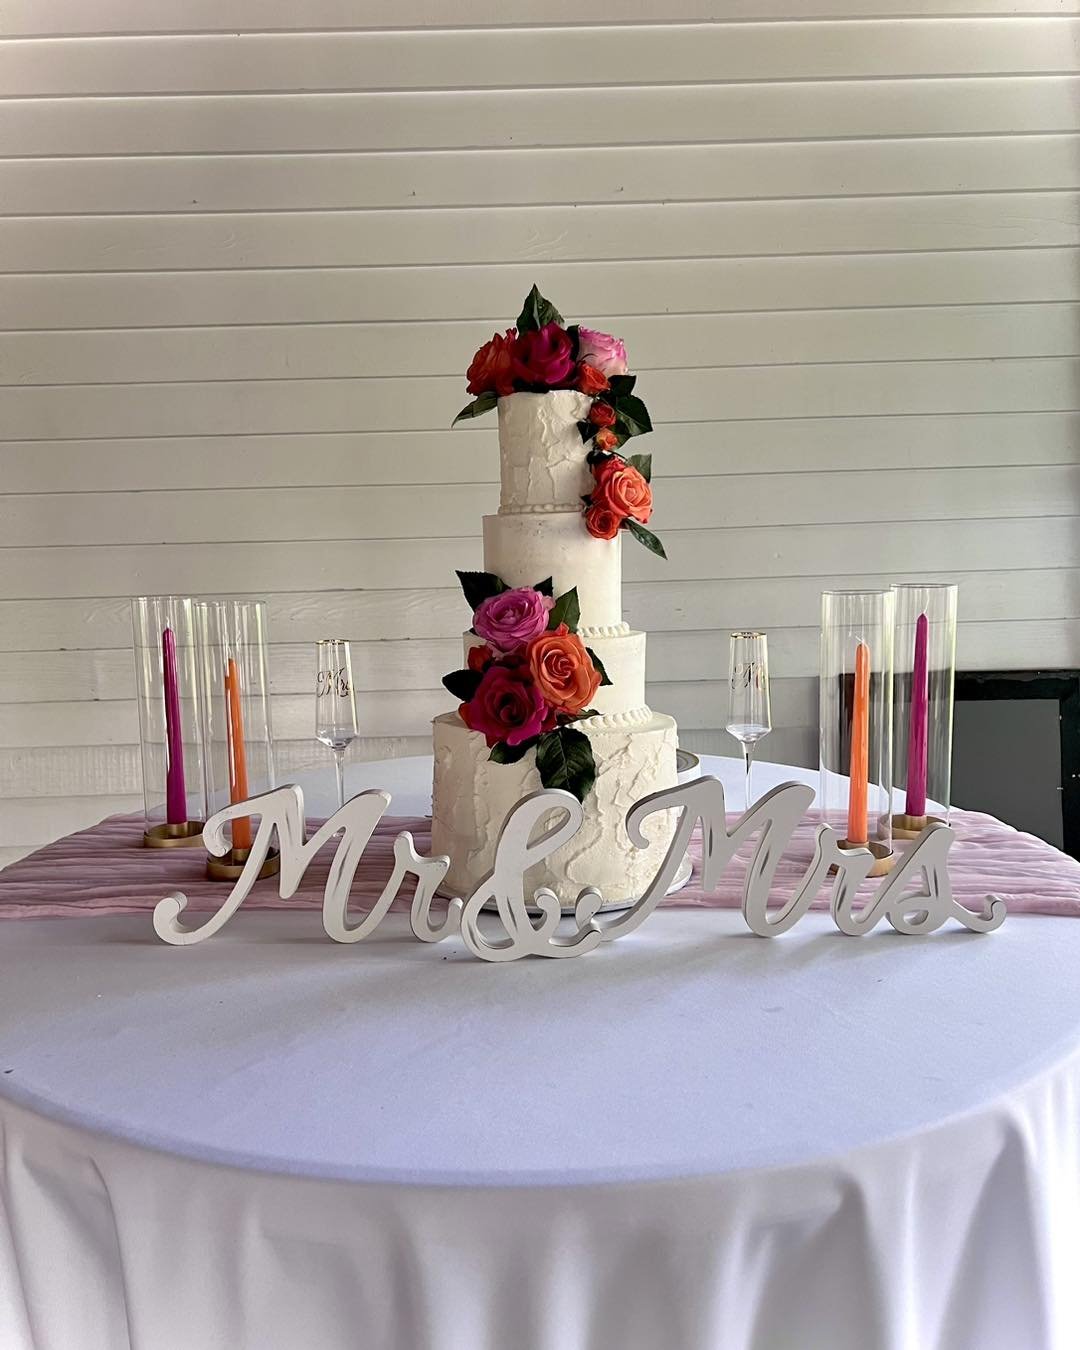 Wedding cakes are my favorite cakes🥹🥰
&bull;&bull;&bull;
Go to www.murphyssweets.com to start your wedding cake planning today 🍰🕊️